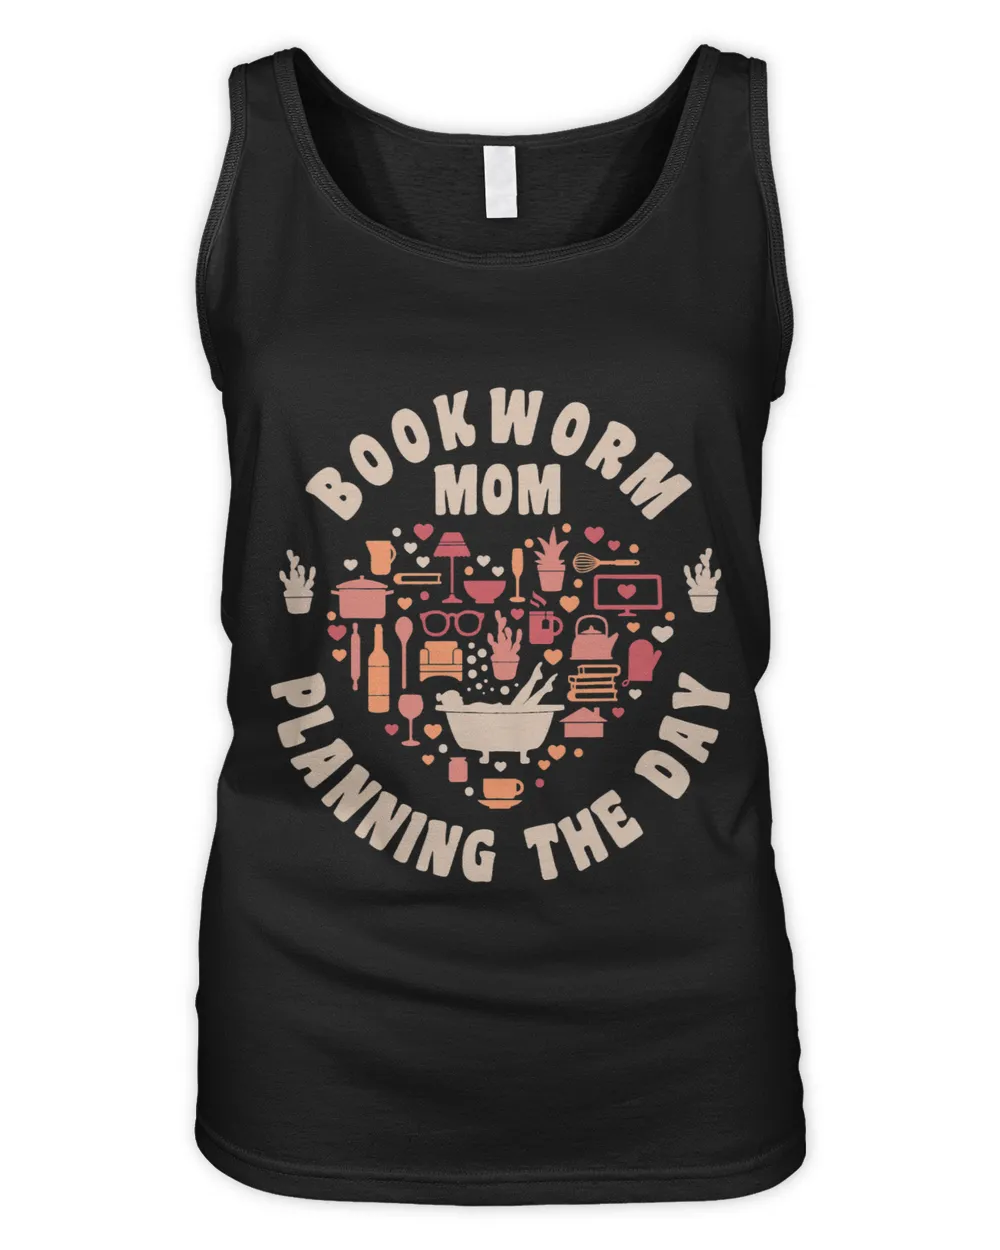 Bookworm Mom Planning The Day Heart Quote Mothers Day